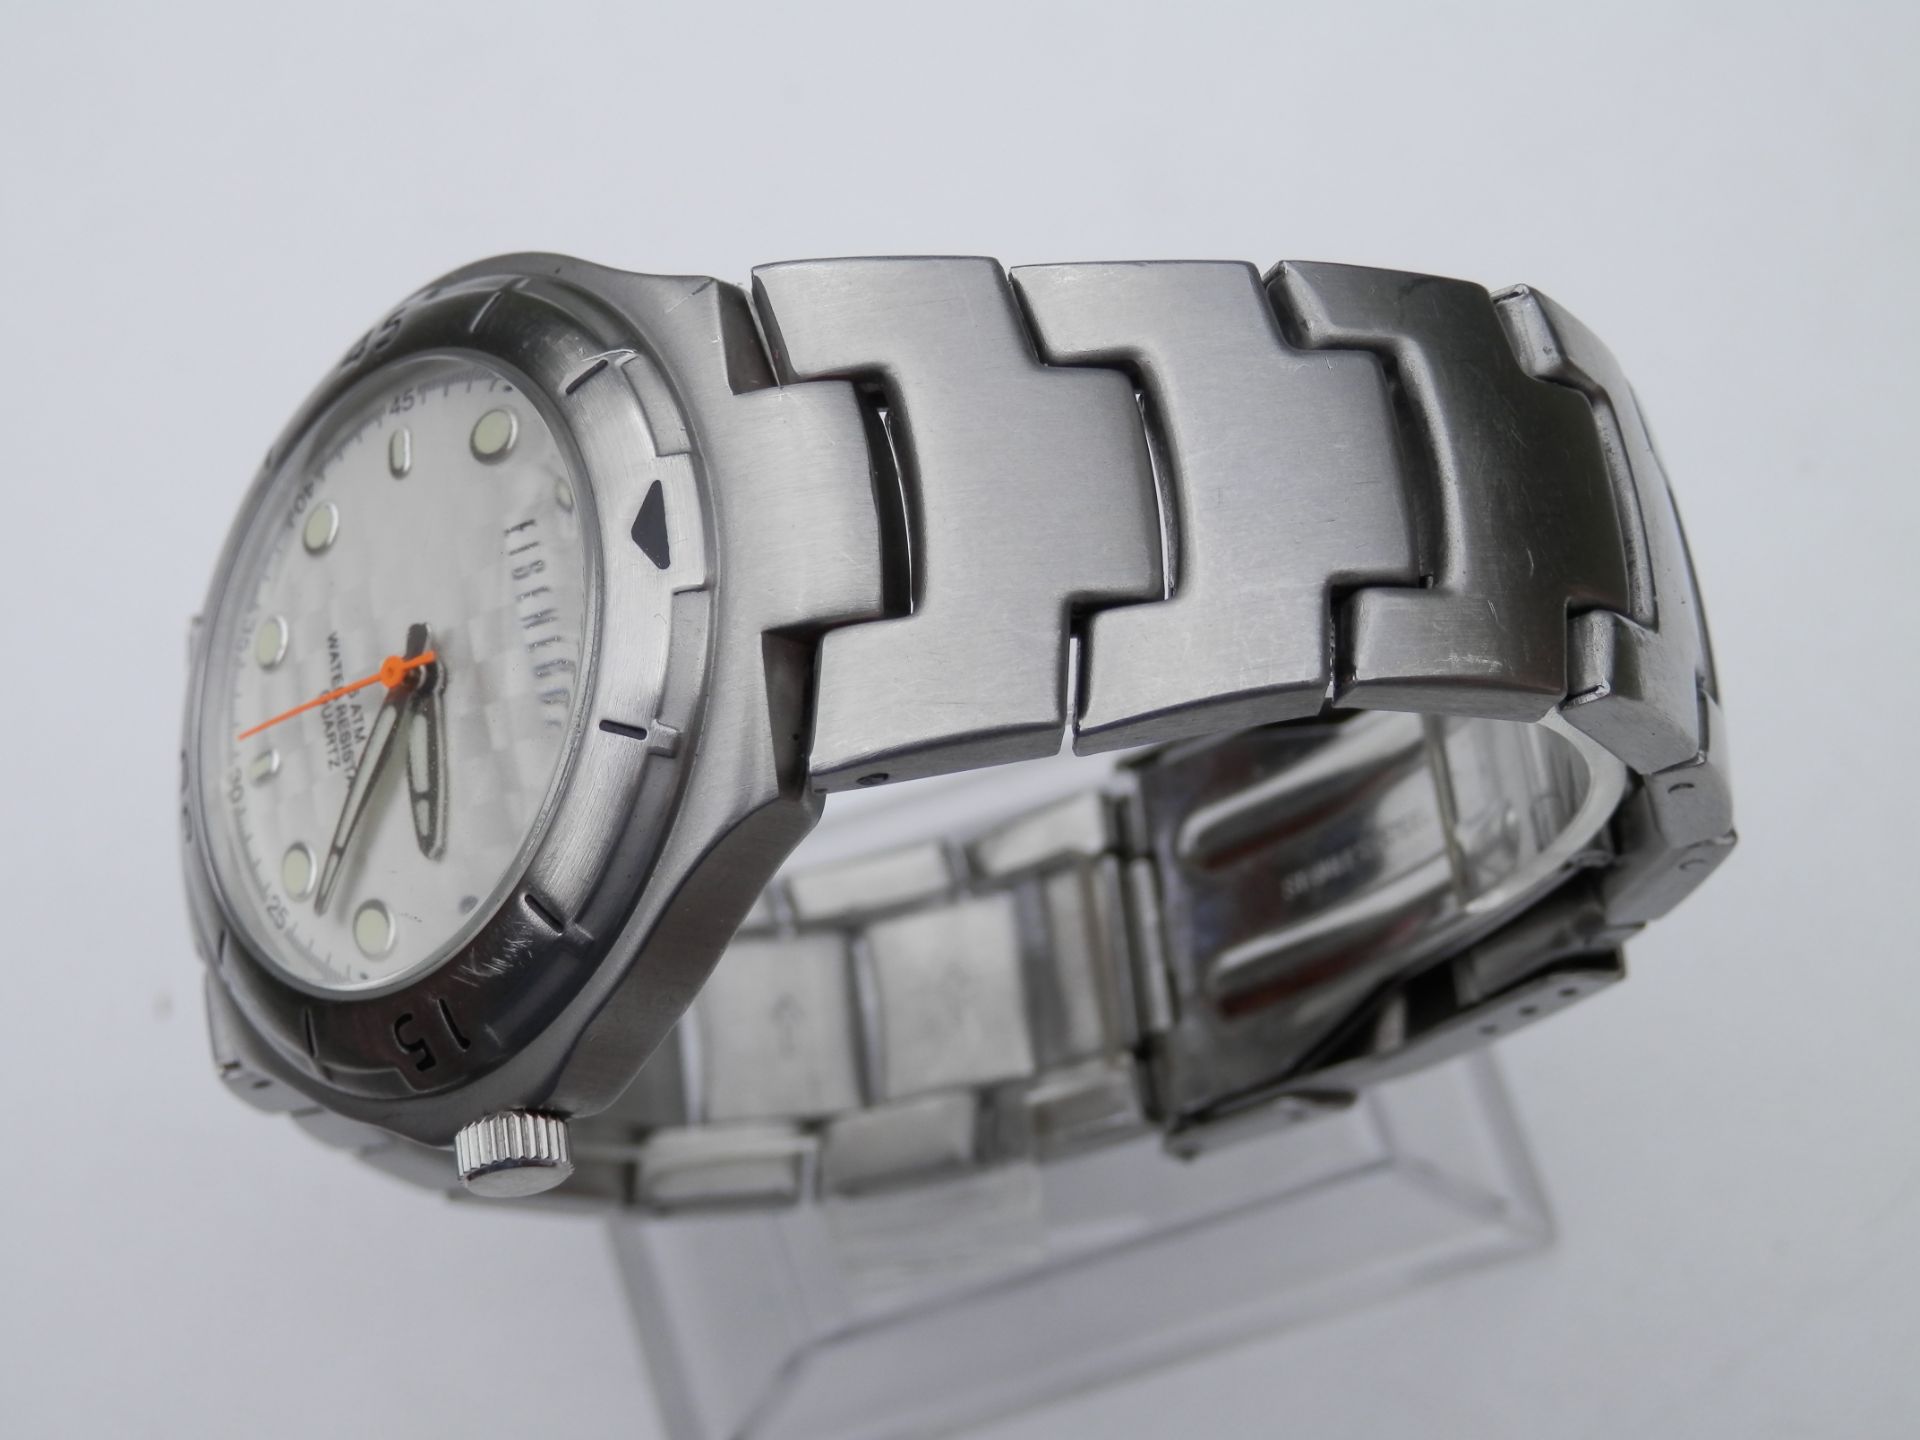 HEAVY FULL STAINLESS EISENEGGER 42MM QUARTZ 5ATM WR WATCH, WITH 8" STRAP. RRP £95 - Image 9 of 9